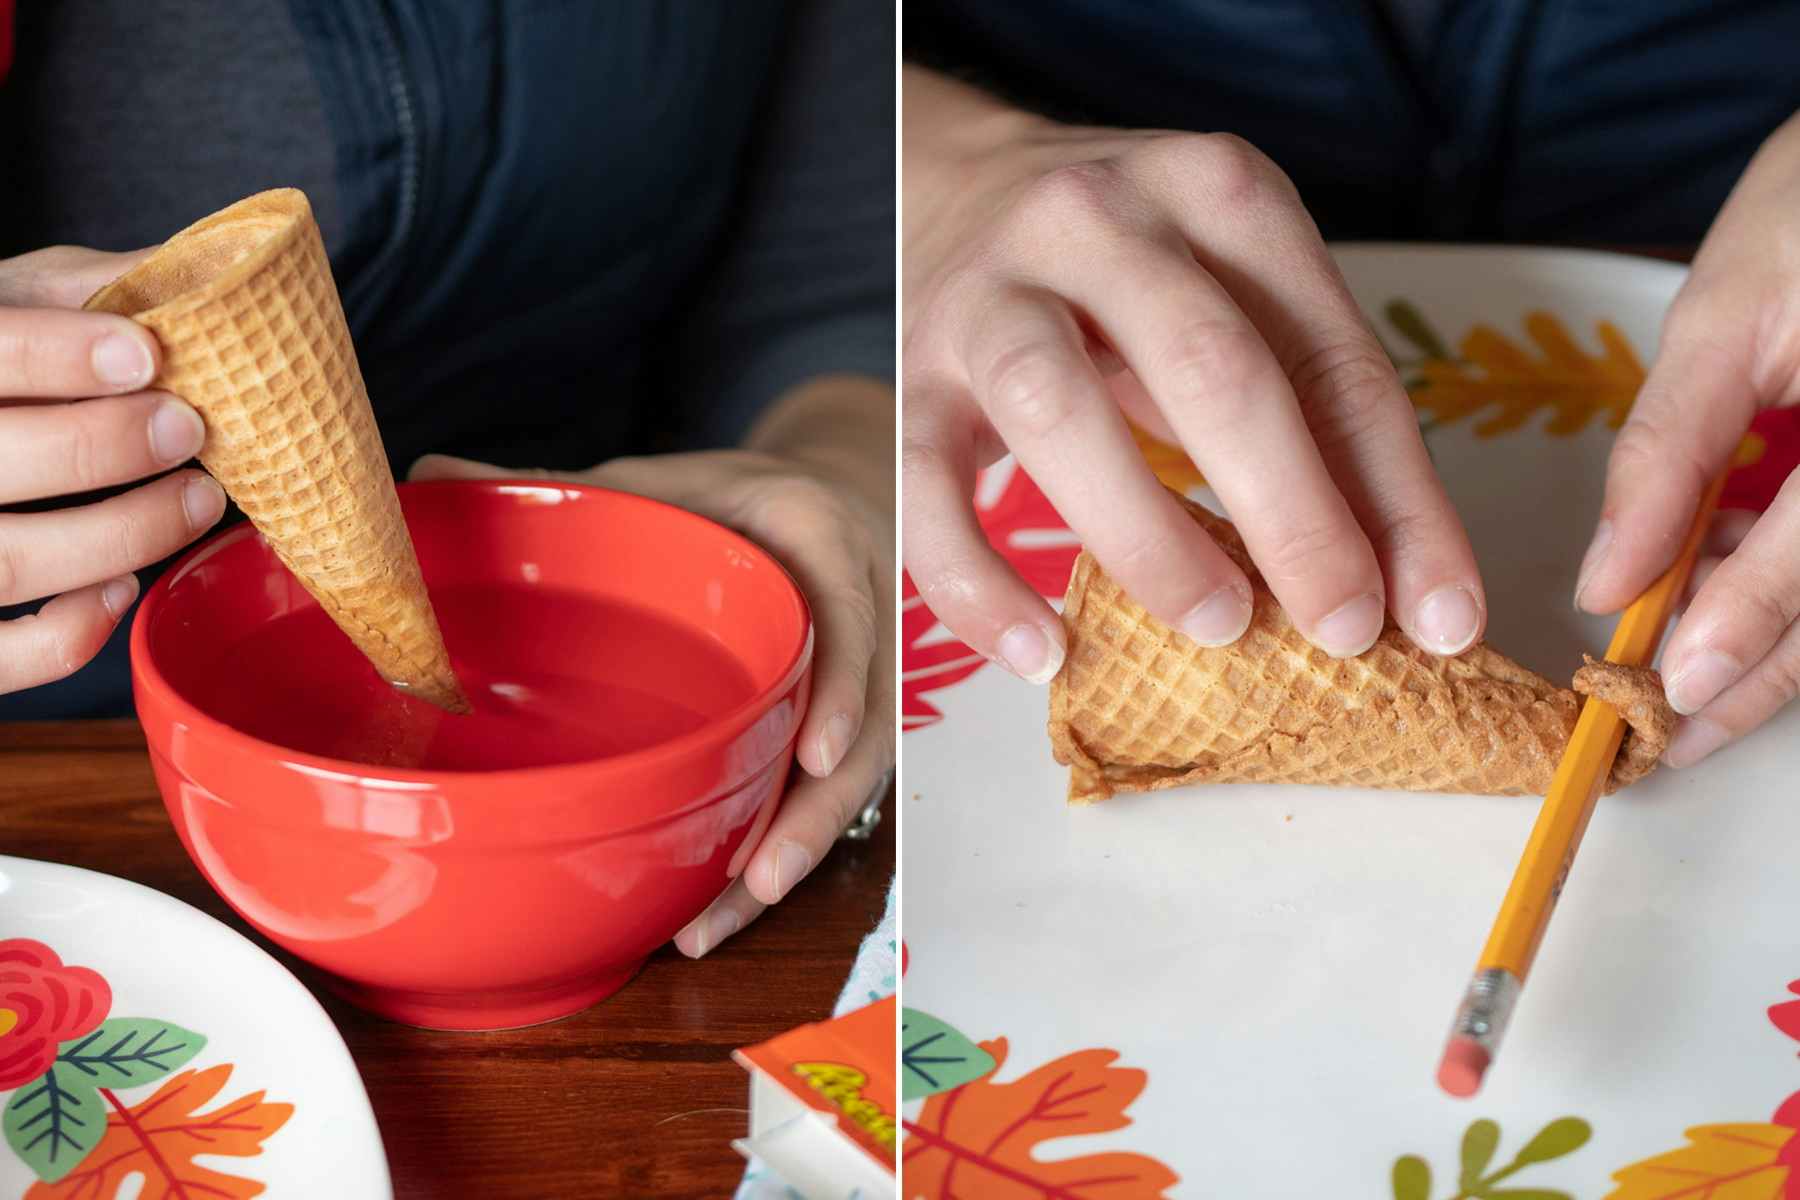 A person dipping an ice cream cone in a bowl of warm water and using a pencil to roll the bottom.